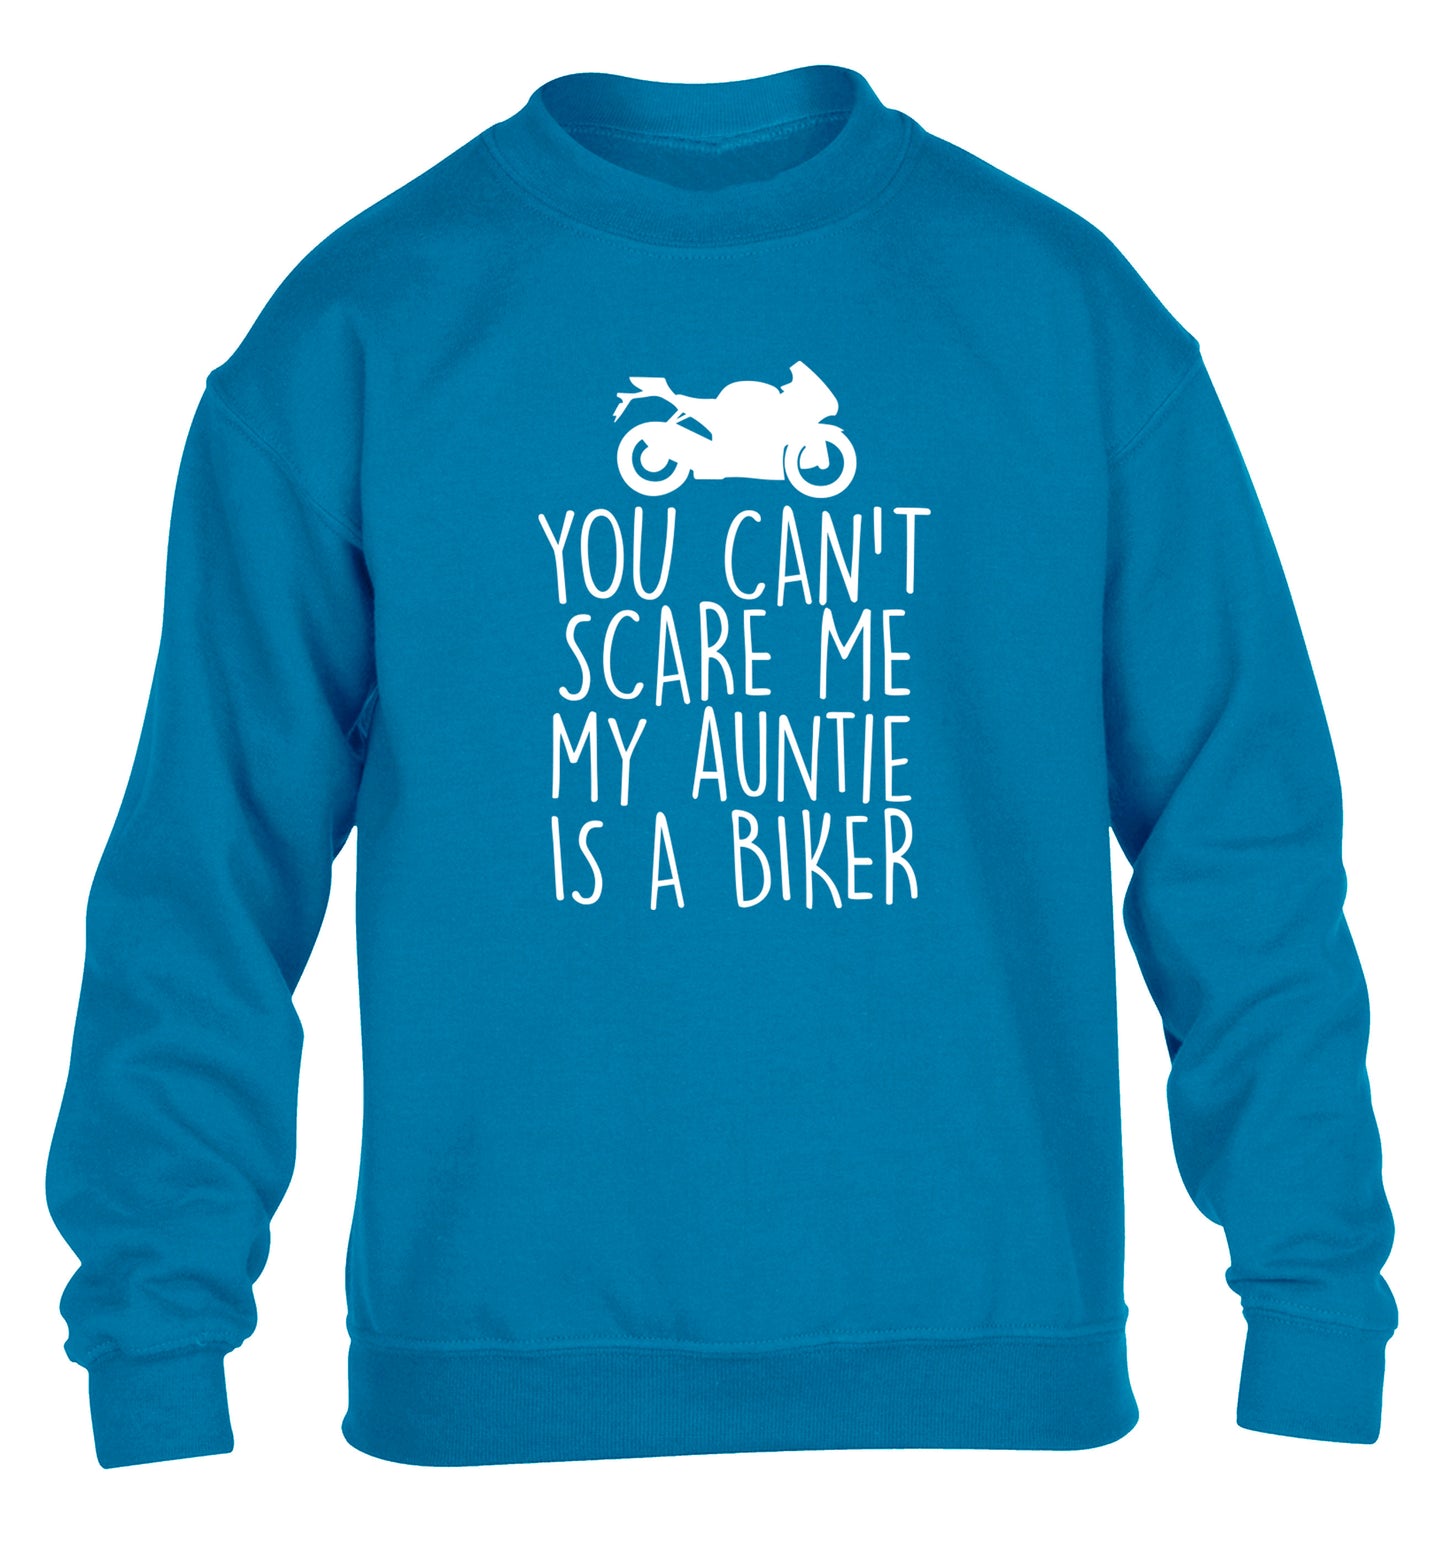 You can't scare me my auntie is a biker children's blue sweater 12-13 Years